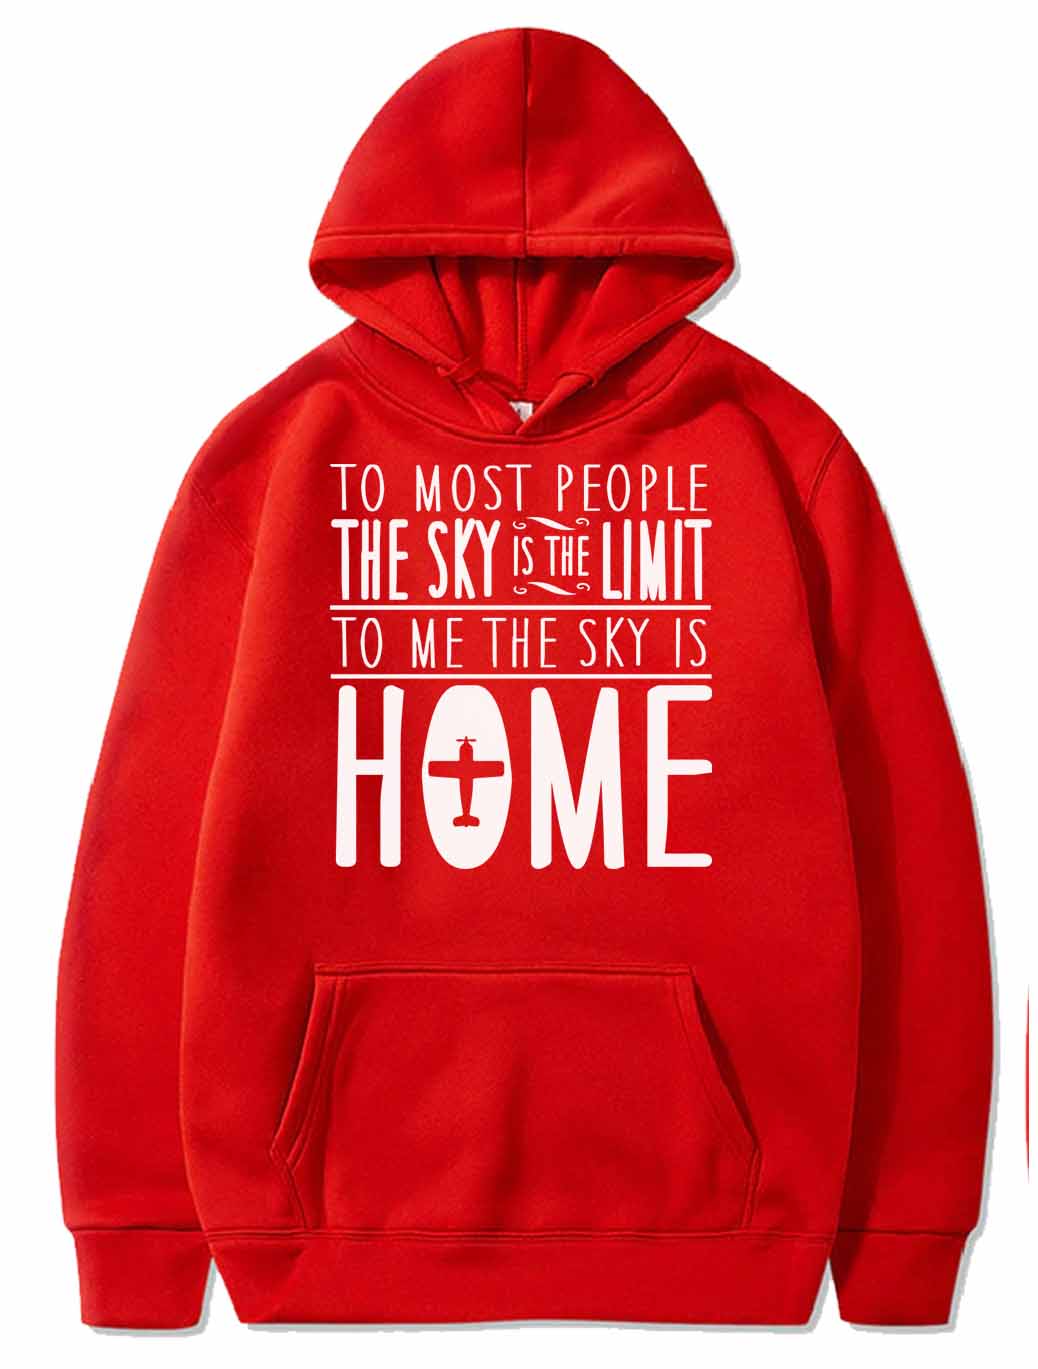 15_sky is home, not the limit_ PULLOVER THE AV8R